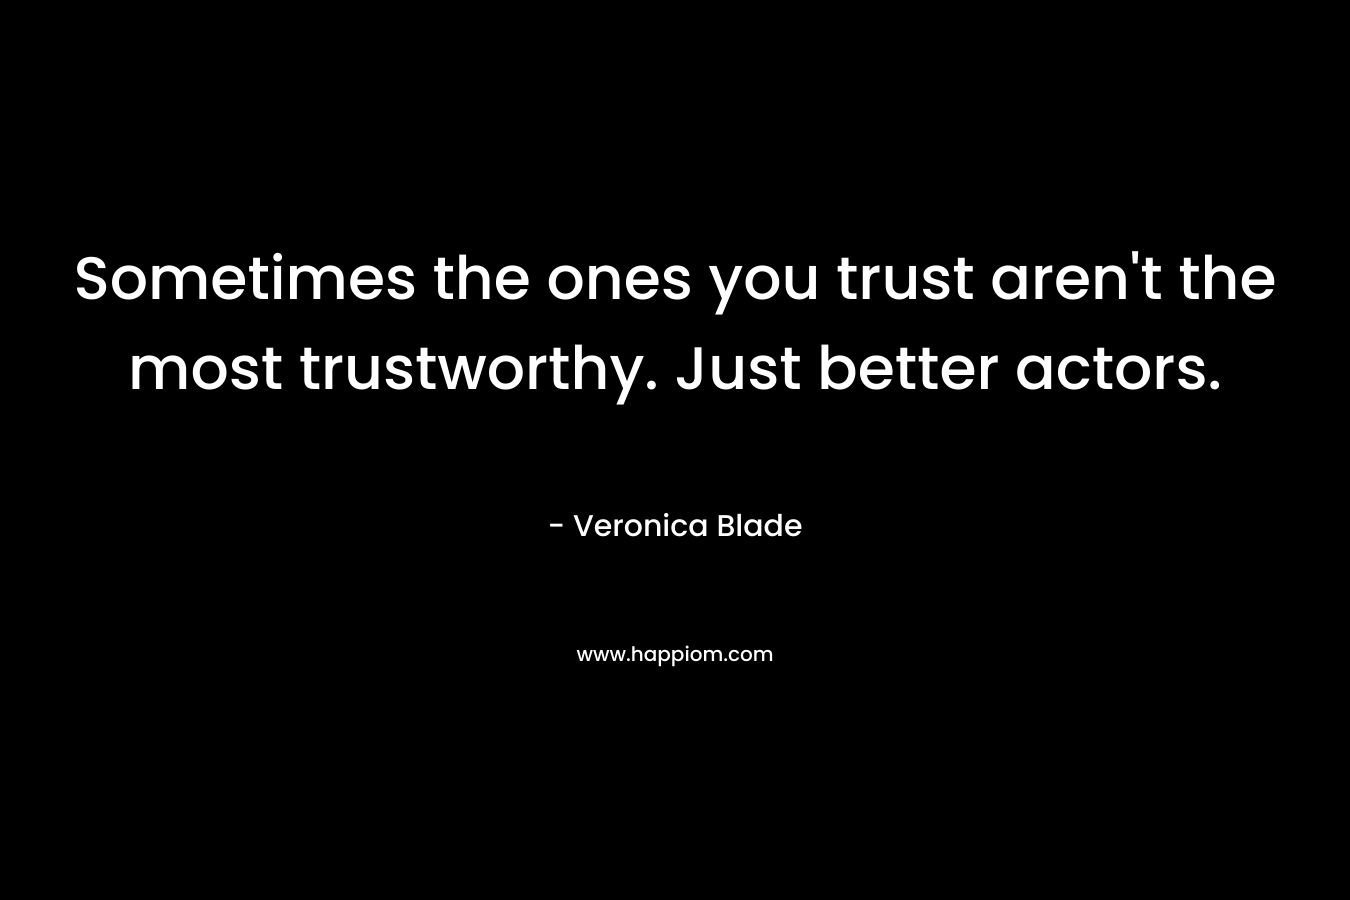 Sometimes the ones you trust aren’t the most trustworthy. Just better actors. – Veronica Blade